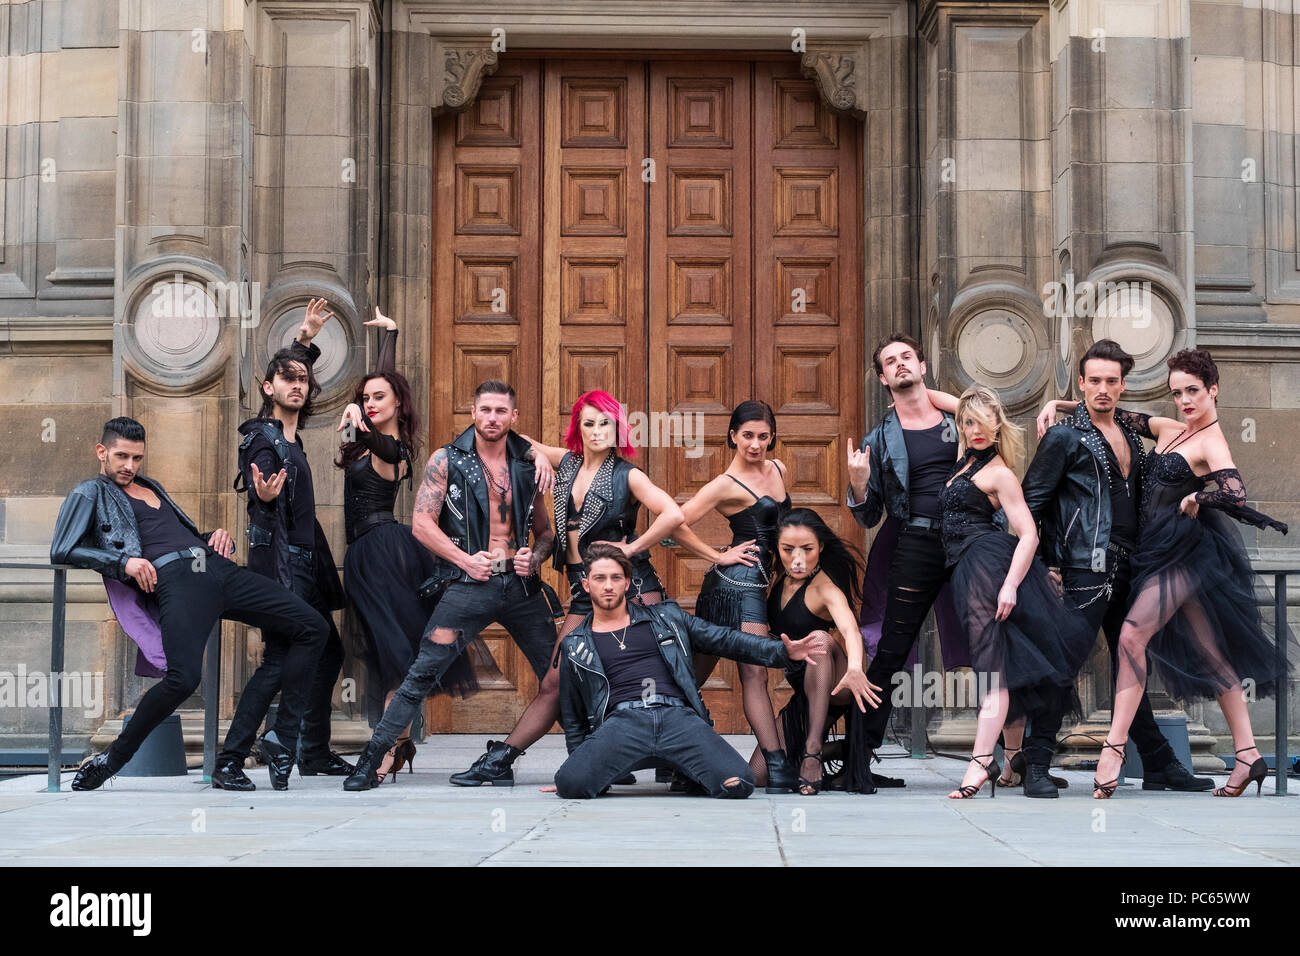 Edinburgh, Scotland, UK; 31 July, 2018. Dance group Burn the Floor: Rebels of Ballroom at a photo Call prior to performances the Edinburgh Fringe Festival. Appearing for the first time at the Fringe the company has reinvented Ballroom dance styles. Credit: Iain Masterton/Alamy Live News Stock Photo